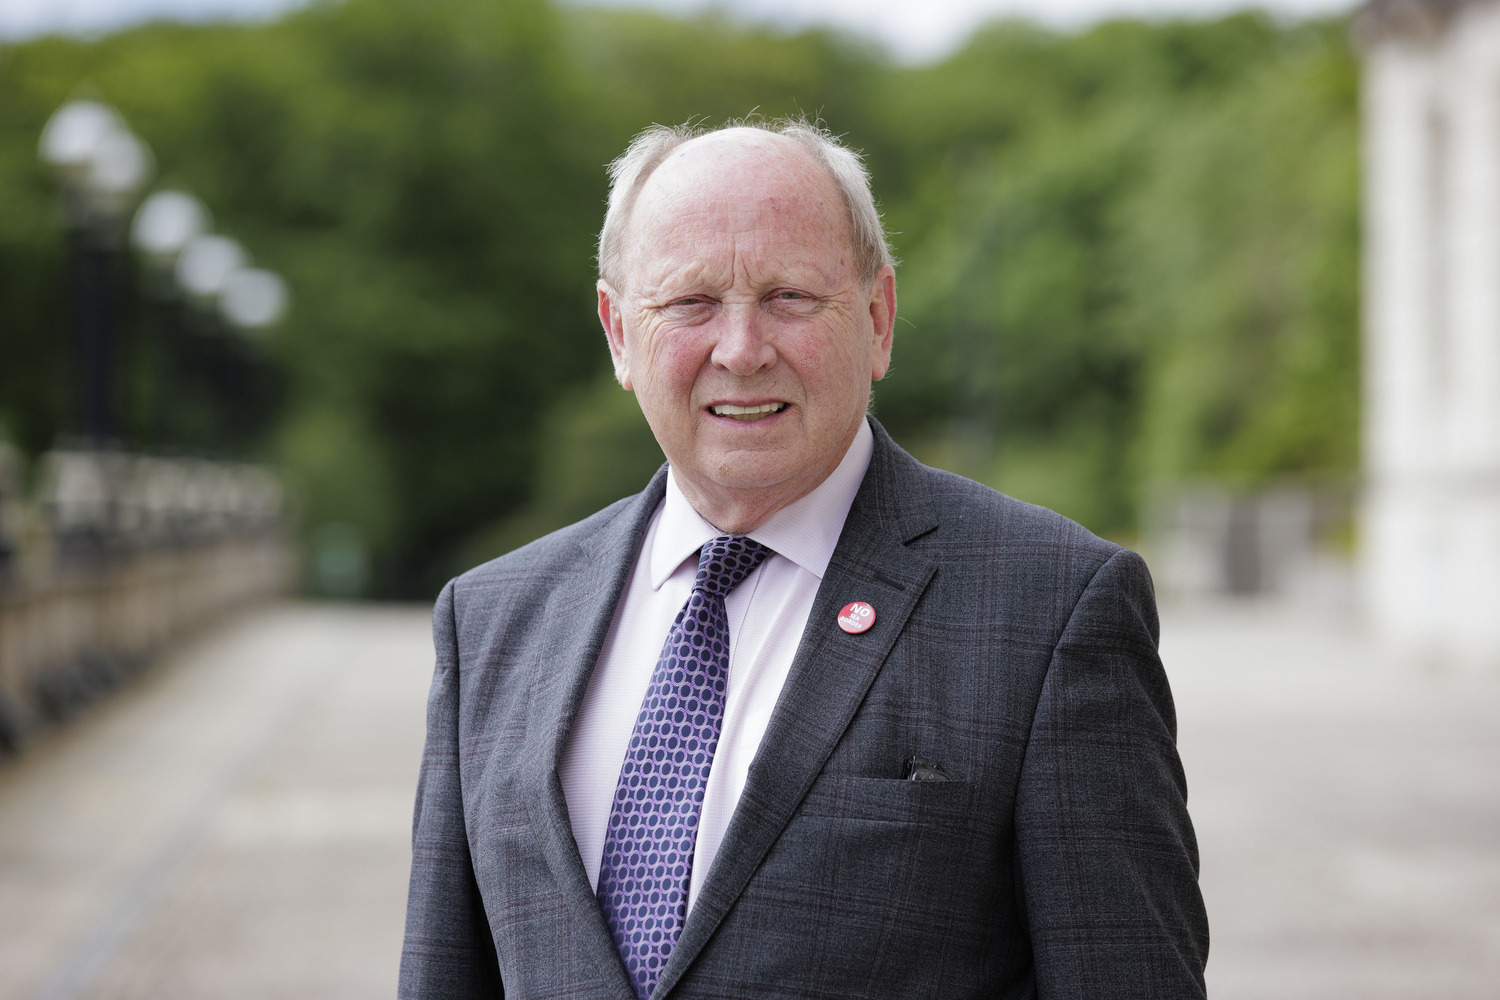 TUV leader Jim Allister in a suit and tie